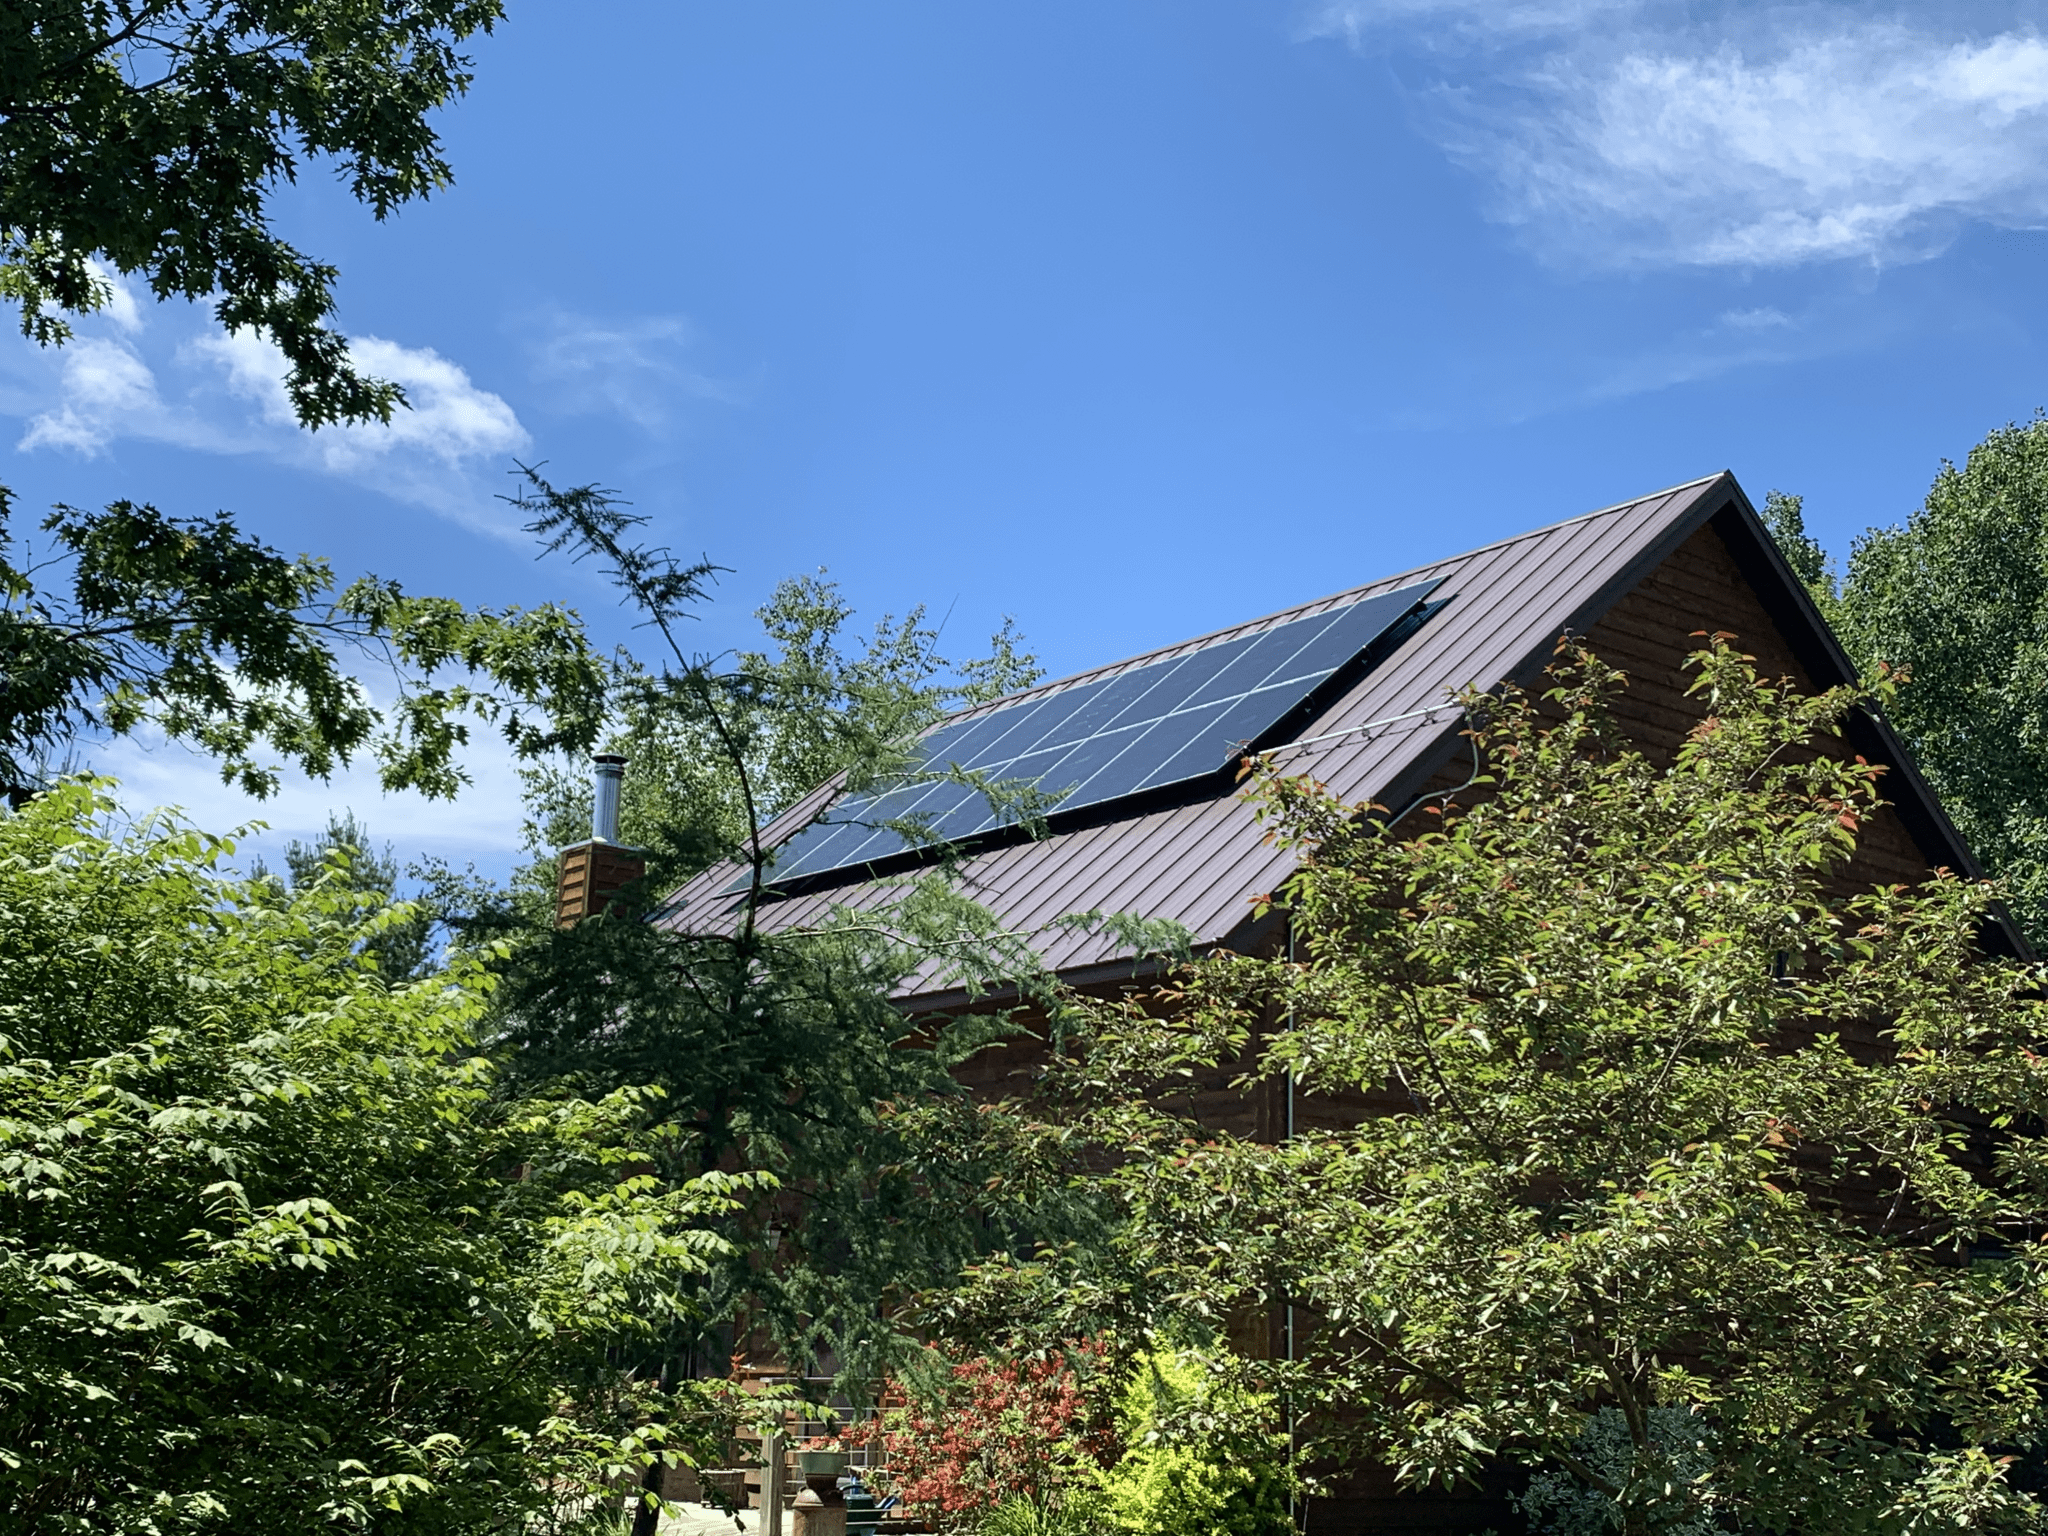 A house with a solar array on the roof pokes above dense foilage on a clear day